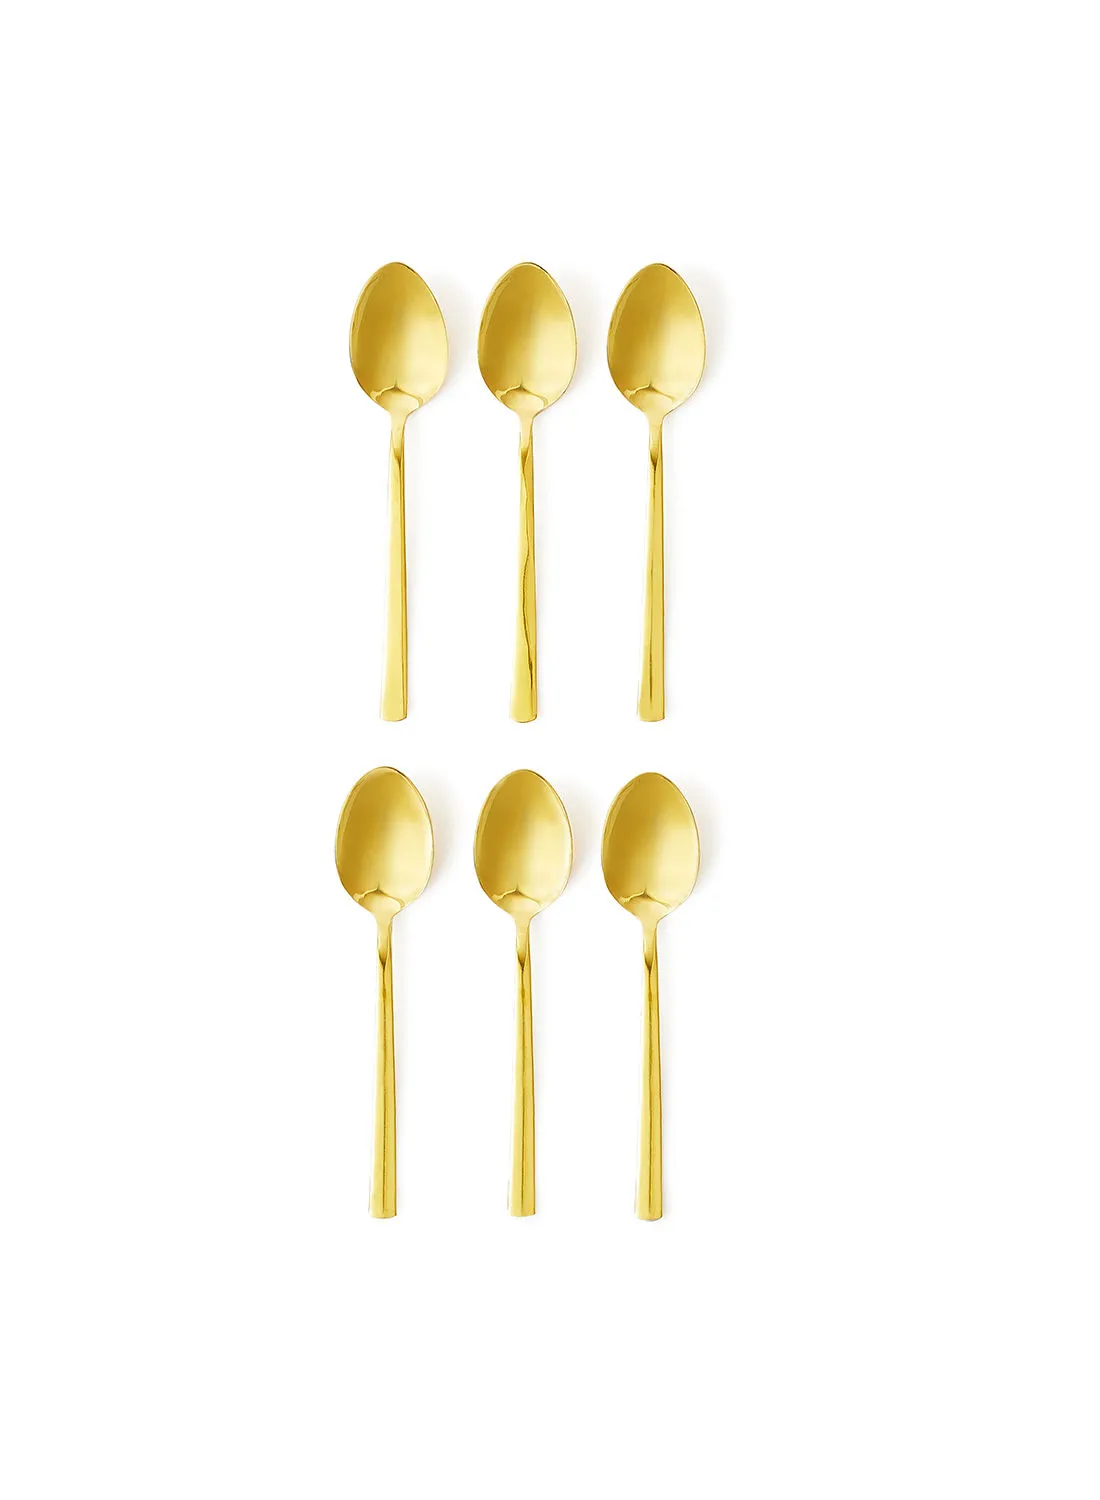 noon east 6 Piece Tablespoons Set - Made Of Stainless Steel - Silverware Flatware - Spoons - Spoon Set - Table Spoons - Serves 6 - Design Gold Spade